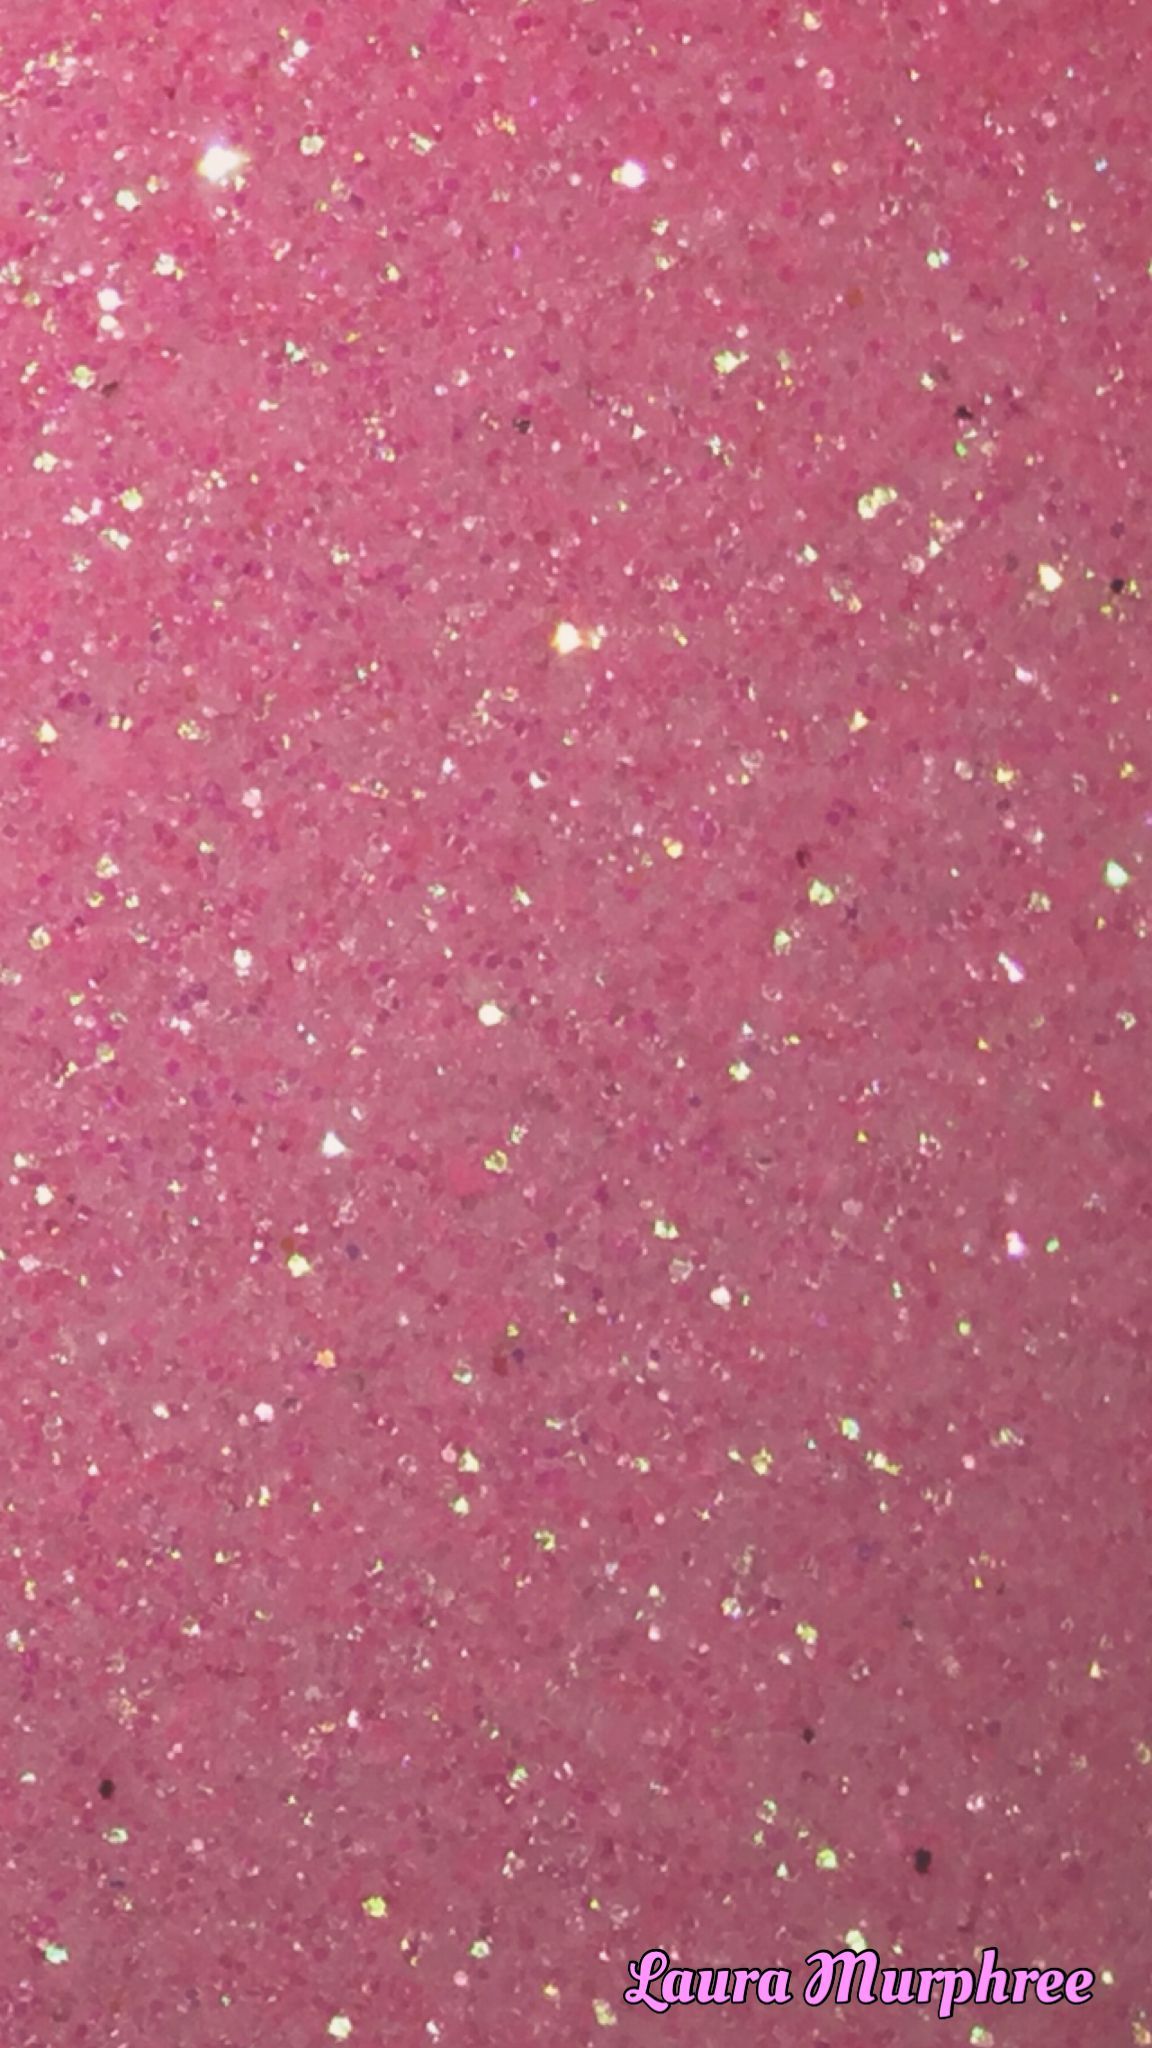 A close up of a pink surface covered in glitter. - Bling